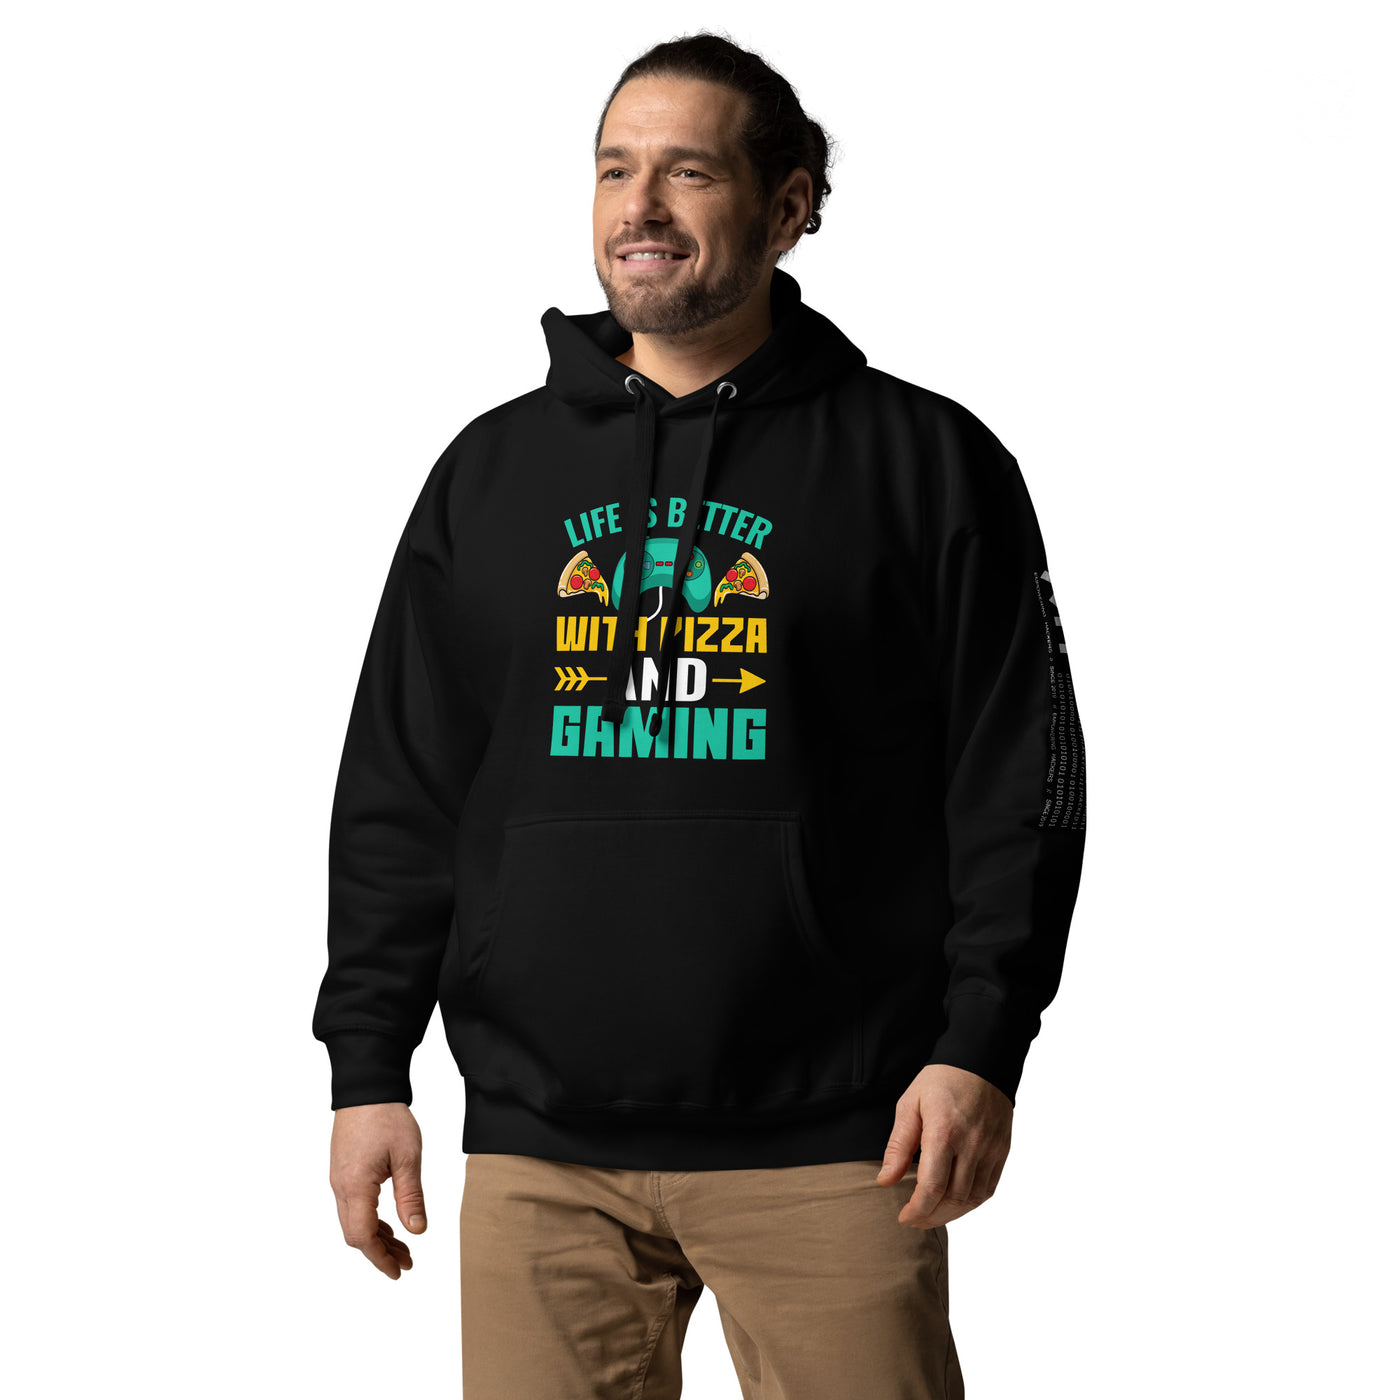 Life is Better With Pizza and Gaming Rima 14 - Unisex Hoodie